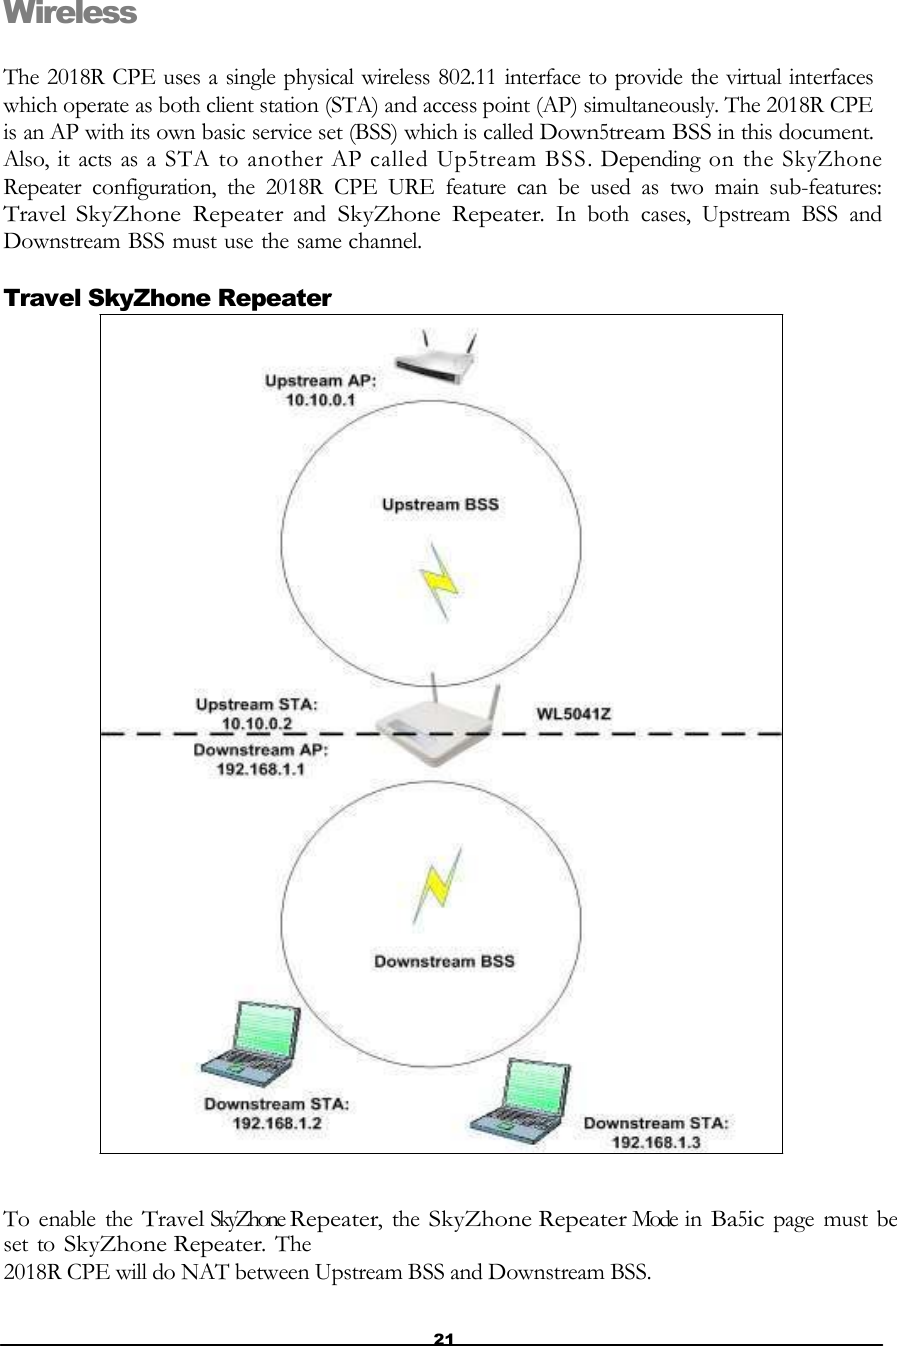 21        Wireless  The 2018R CPE uses a single physical wireless 802.11 interface to provide the virtual interfaces which operate as both client station (STA) and access point (AP) simultaneously. The 2018R CPE is an AP with its own basic service set (BSS) which is called Down5tream BSS in this document. Also, it acts as a STA to another AP called Up5tream BSS. Depending on the SkyZhone Repeater  configuration,  the  2018R  CPE  URE  feature  can  be  used  as  two  main  sub-features: Travel SkyZhone  Repeater and SkyZhone  Repeater.  In  both  cases,  Upstream  BSS  and Downstream BSS must use the same channel.  Travel SkyZhone Repeater                                            To enable the Travel SkyZhone Repeater, the SkyZhone Repeater Mode  in Ba5ic page must be set to SkyZhone Repeater. The 2018R CPE will do NAT between Upstream BSS and Downstream BSS. 